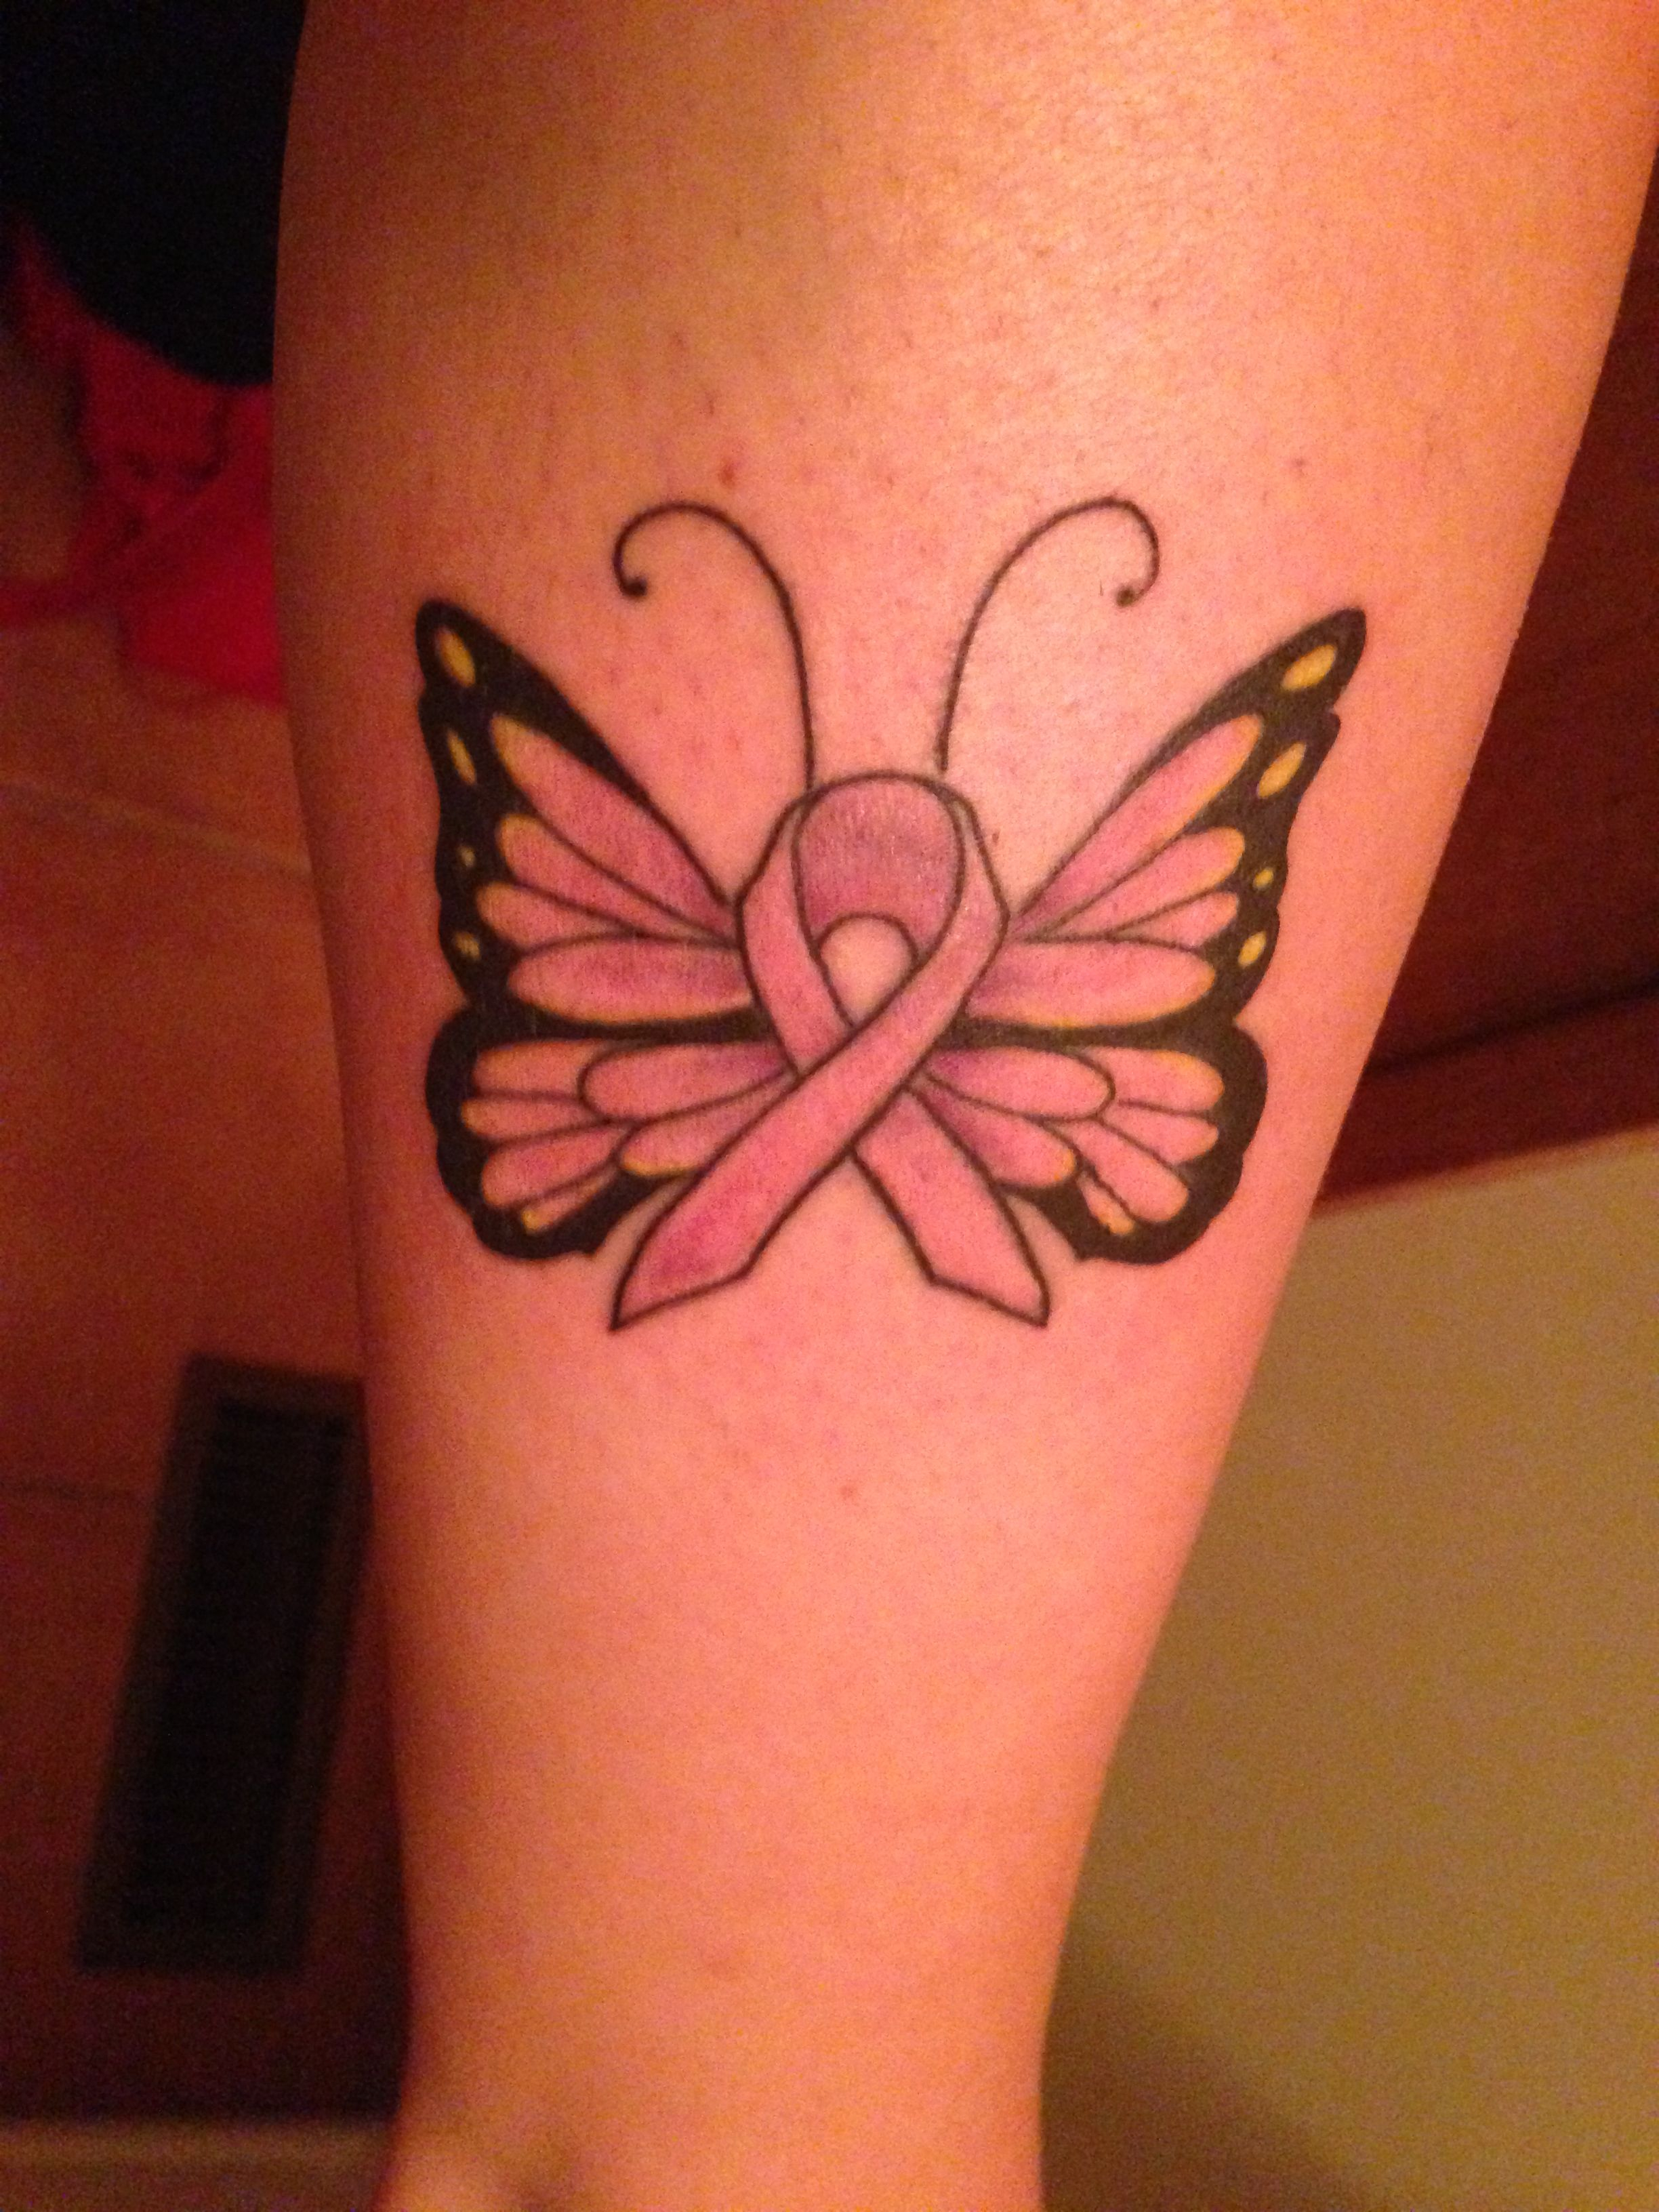 Breast Cancer Butterfly Tattoo Cute Small Tattoos Breast Cancer intended for dimensions 2448 X 3264